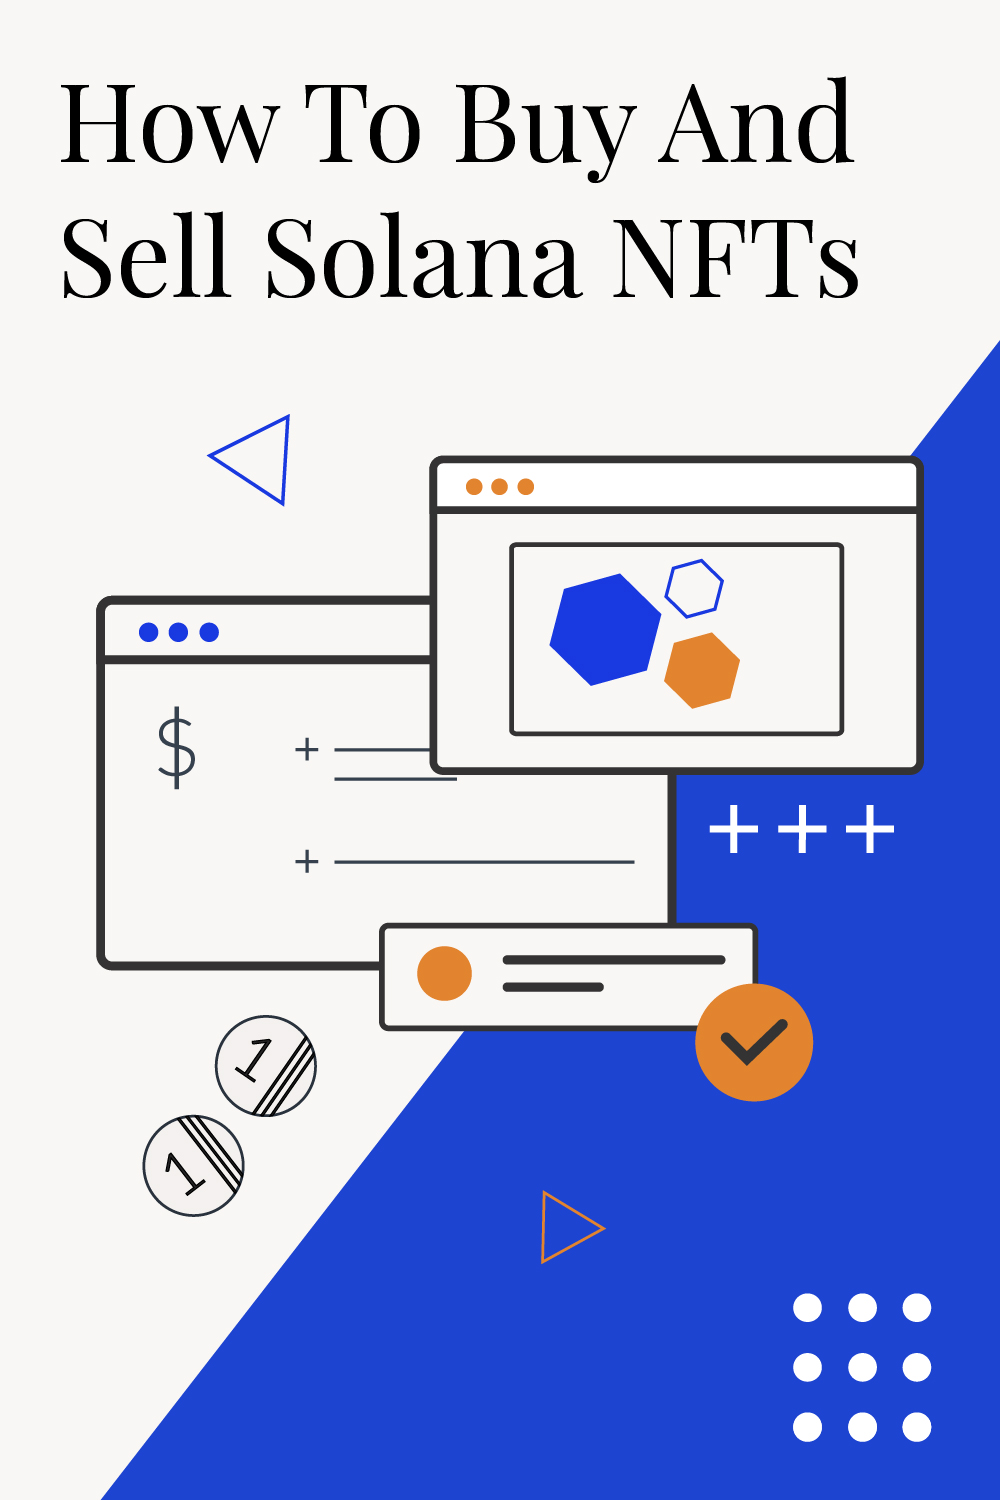 Where To Buy And Sell Solana NFTs – 7 Best Marketplaces